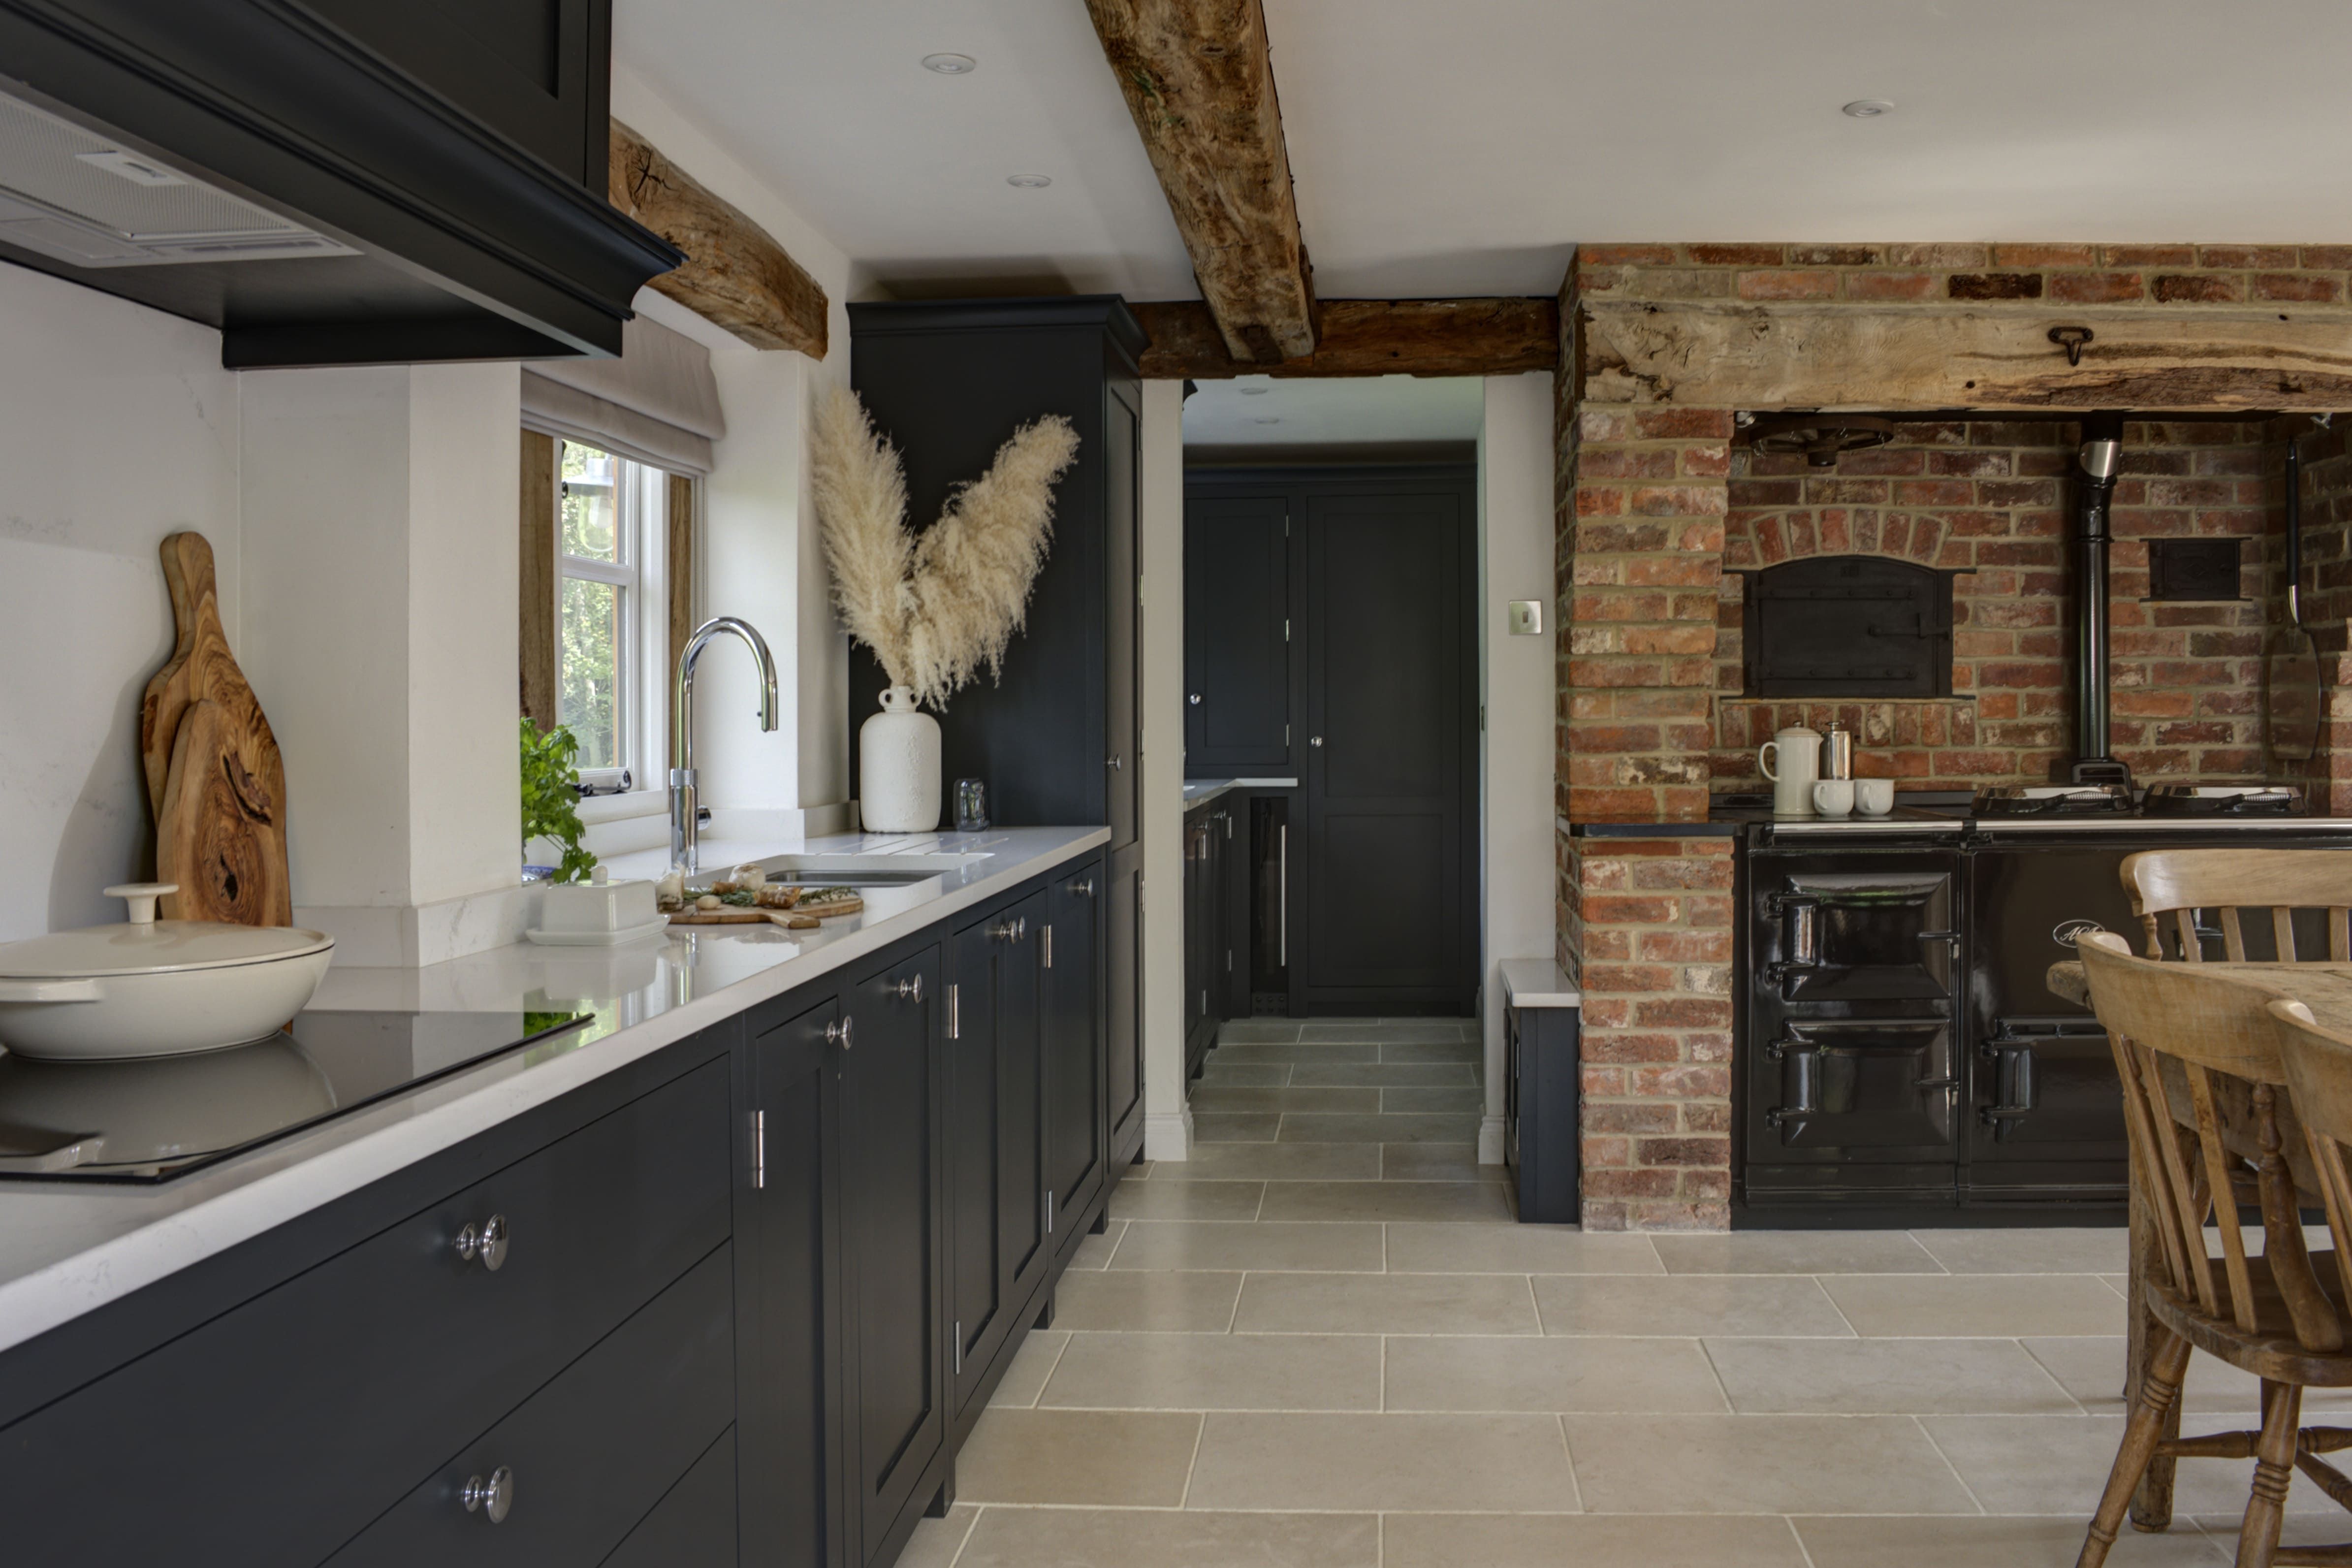 a rustic interior, with exposed oak beams and brick walls is contrasted by a dark blue, bespoke shaker kitchen with with counter tops.